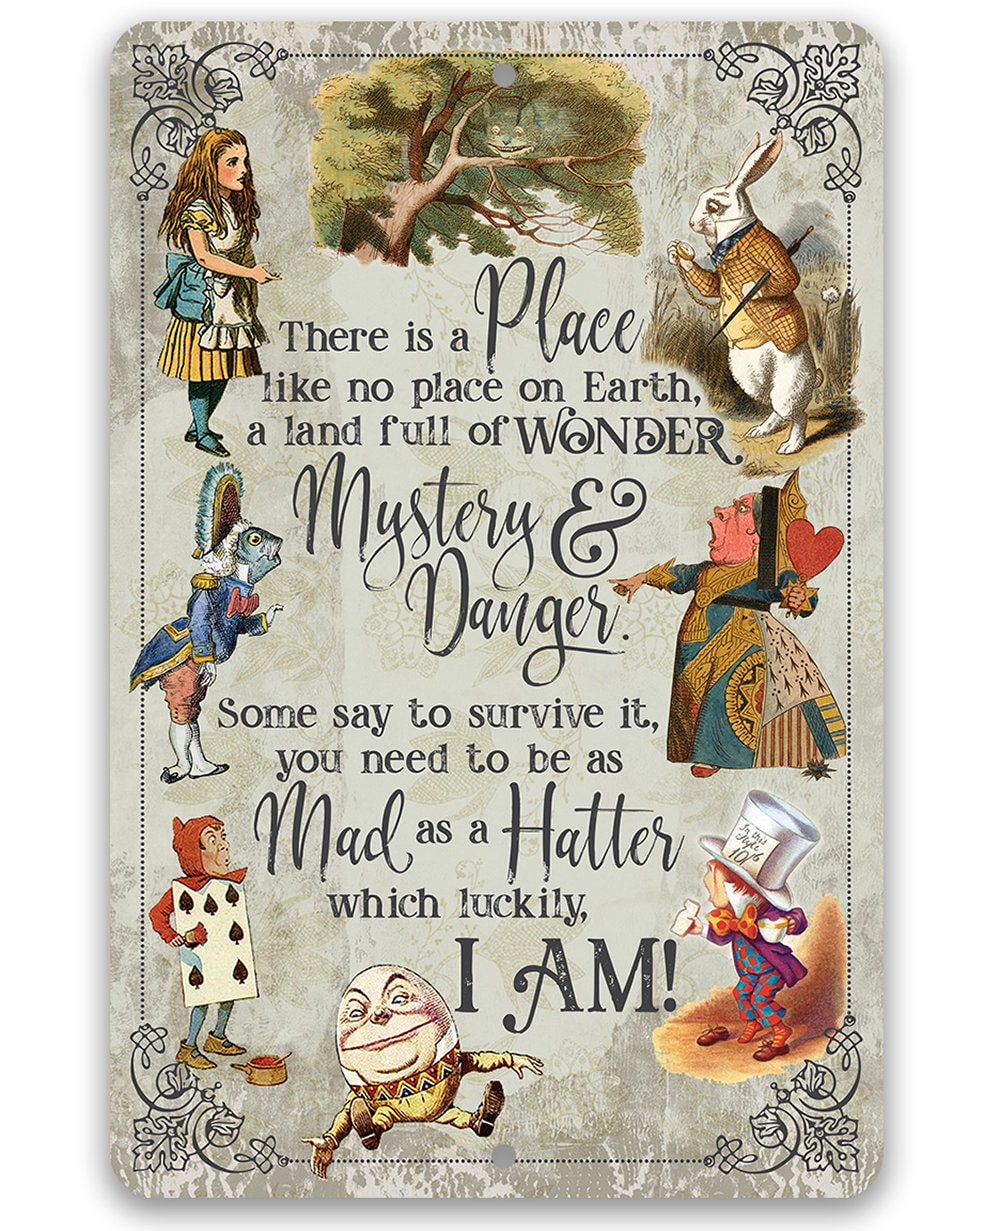 There Is A Place Like No Place On Earth - 8" x 12" or 12" x 18" Aluminum Tin Awesome Metal Poster Lone Star Art 